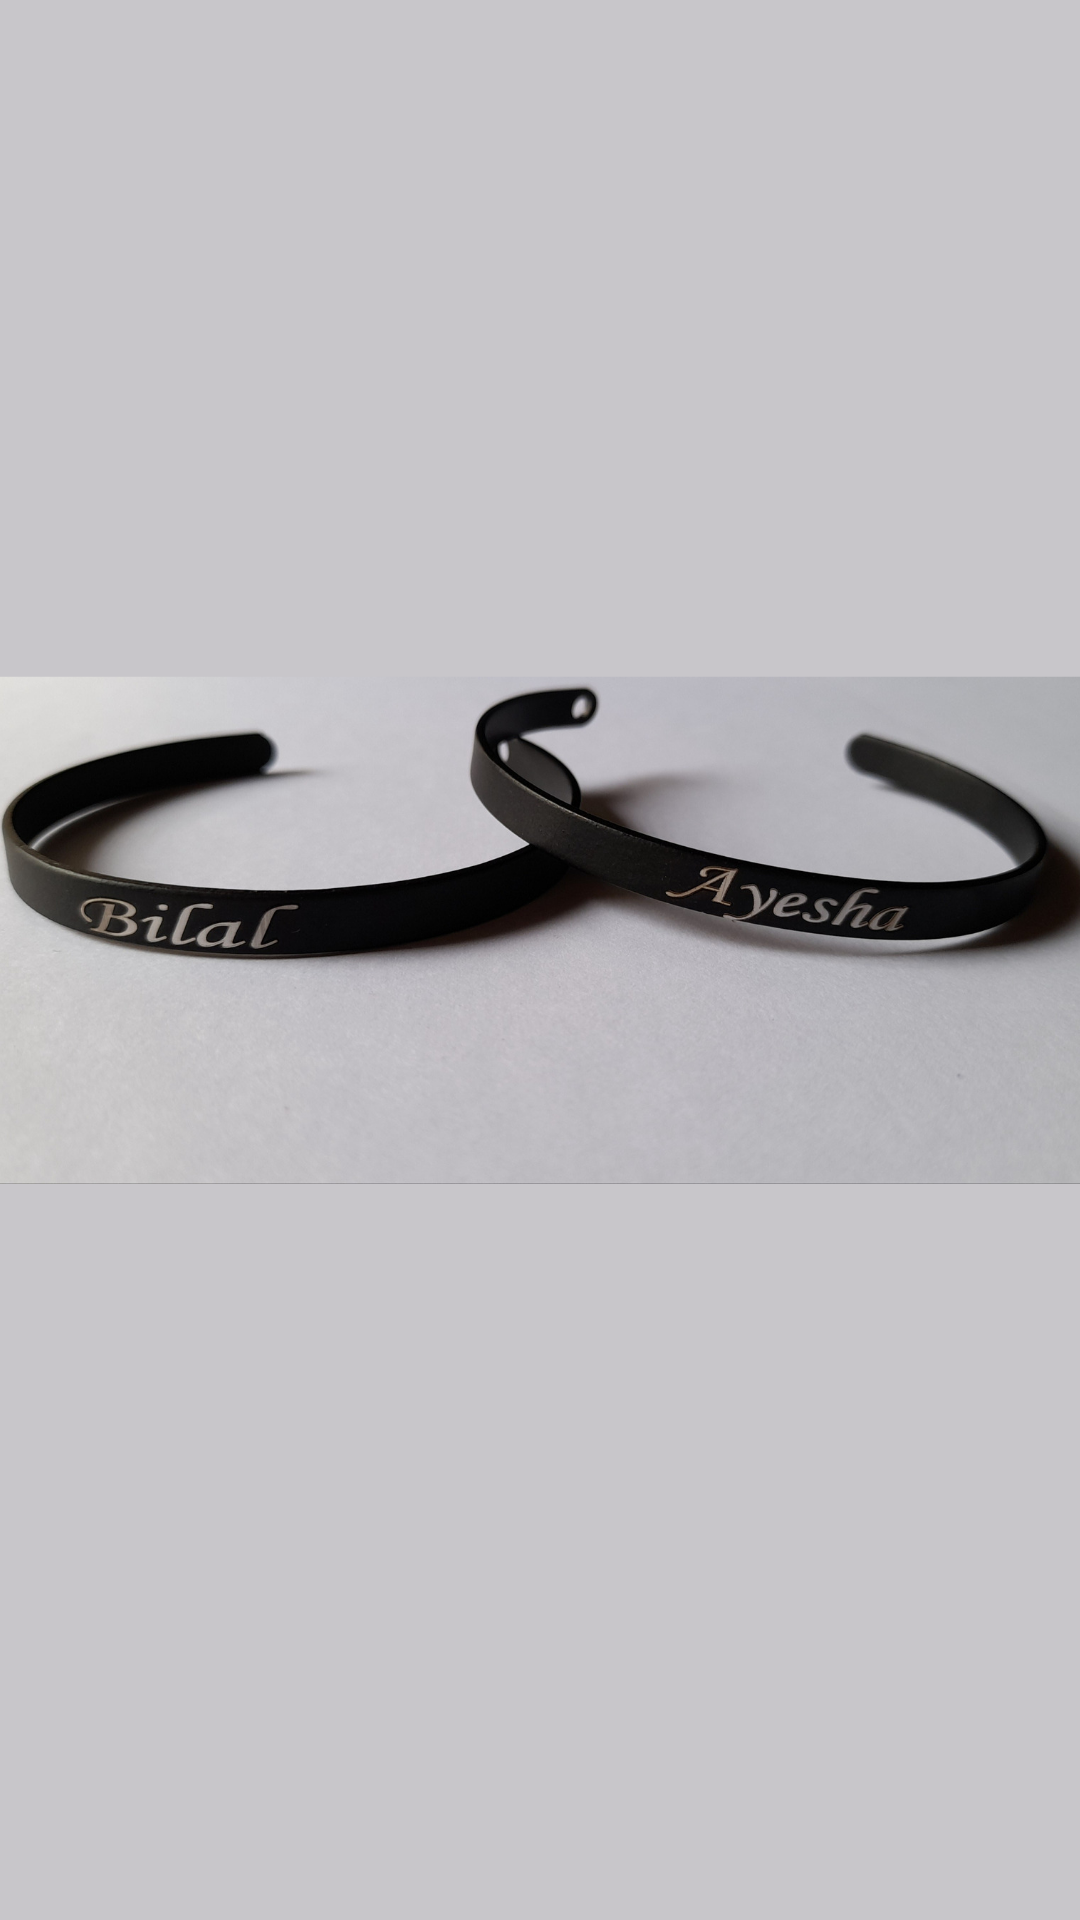 Couple Cuff Braclets (Pair)